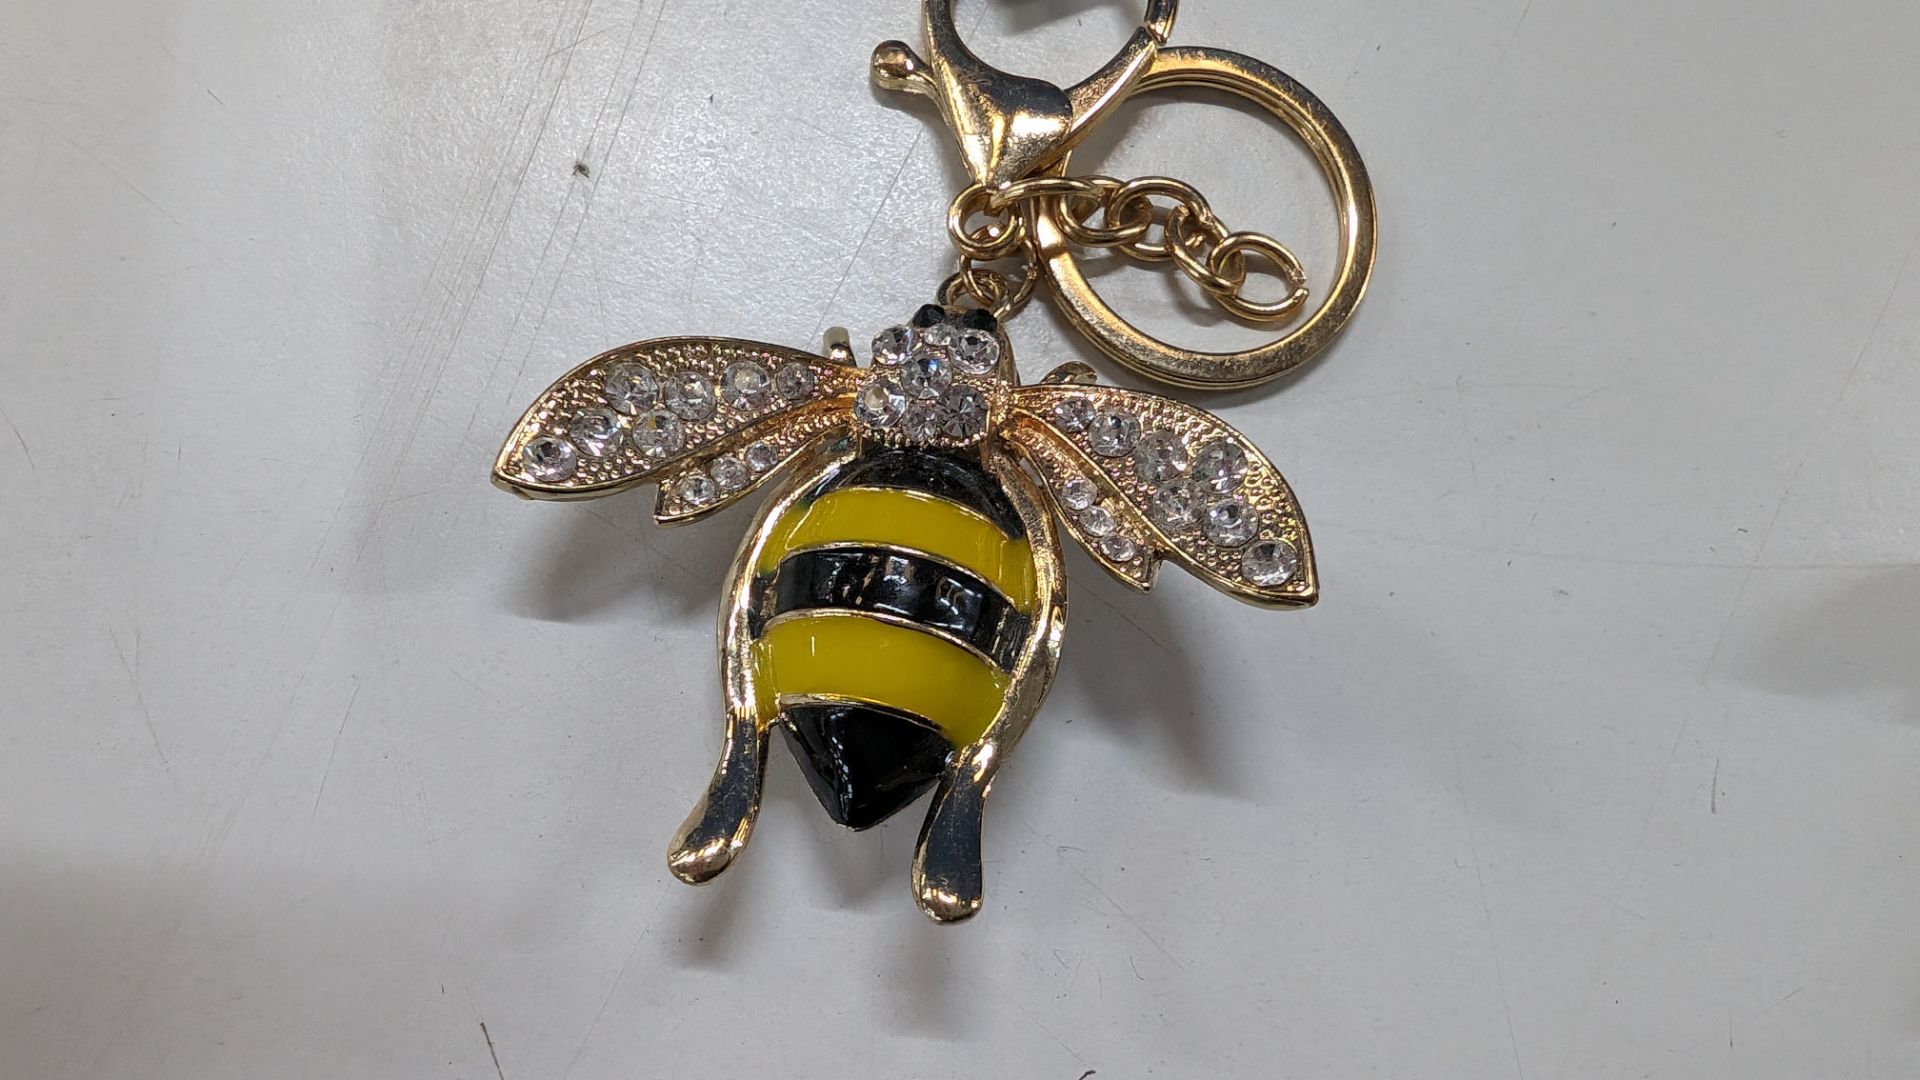 4 off highly decorative bee keyrings - Image 3 of 6